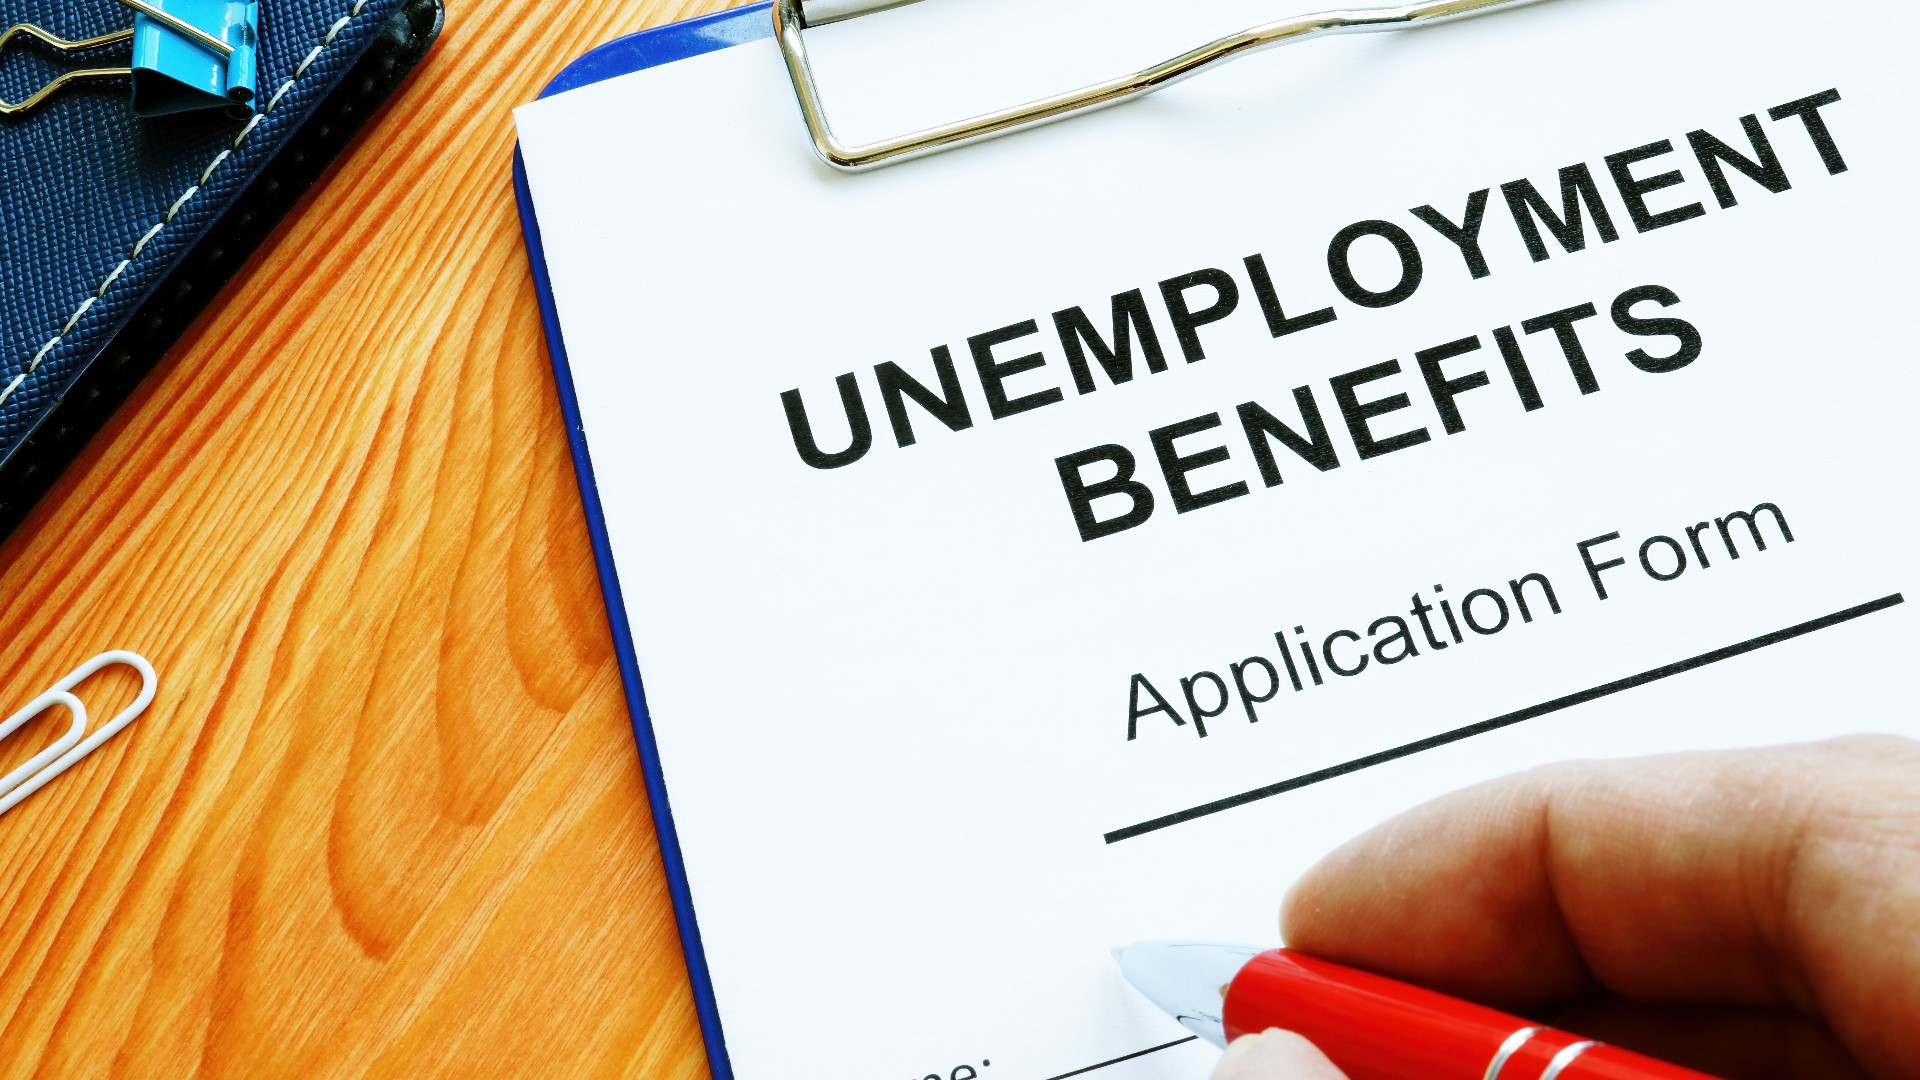 On December 26th, an estimated 12 million people will be cut off from federal jobless benefits, like unemployment extensions and coverage for gig workers.